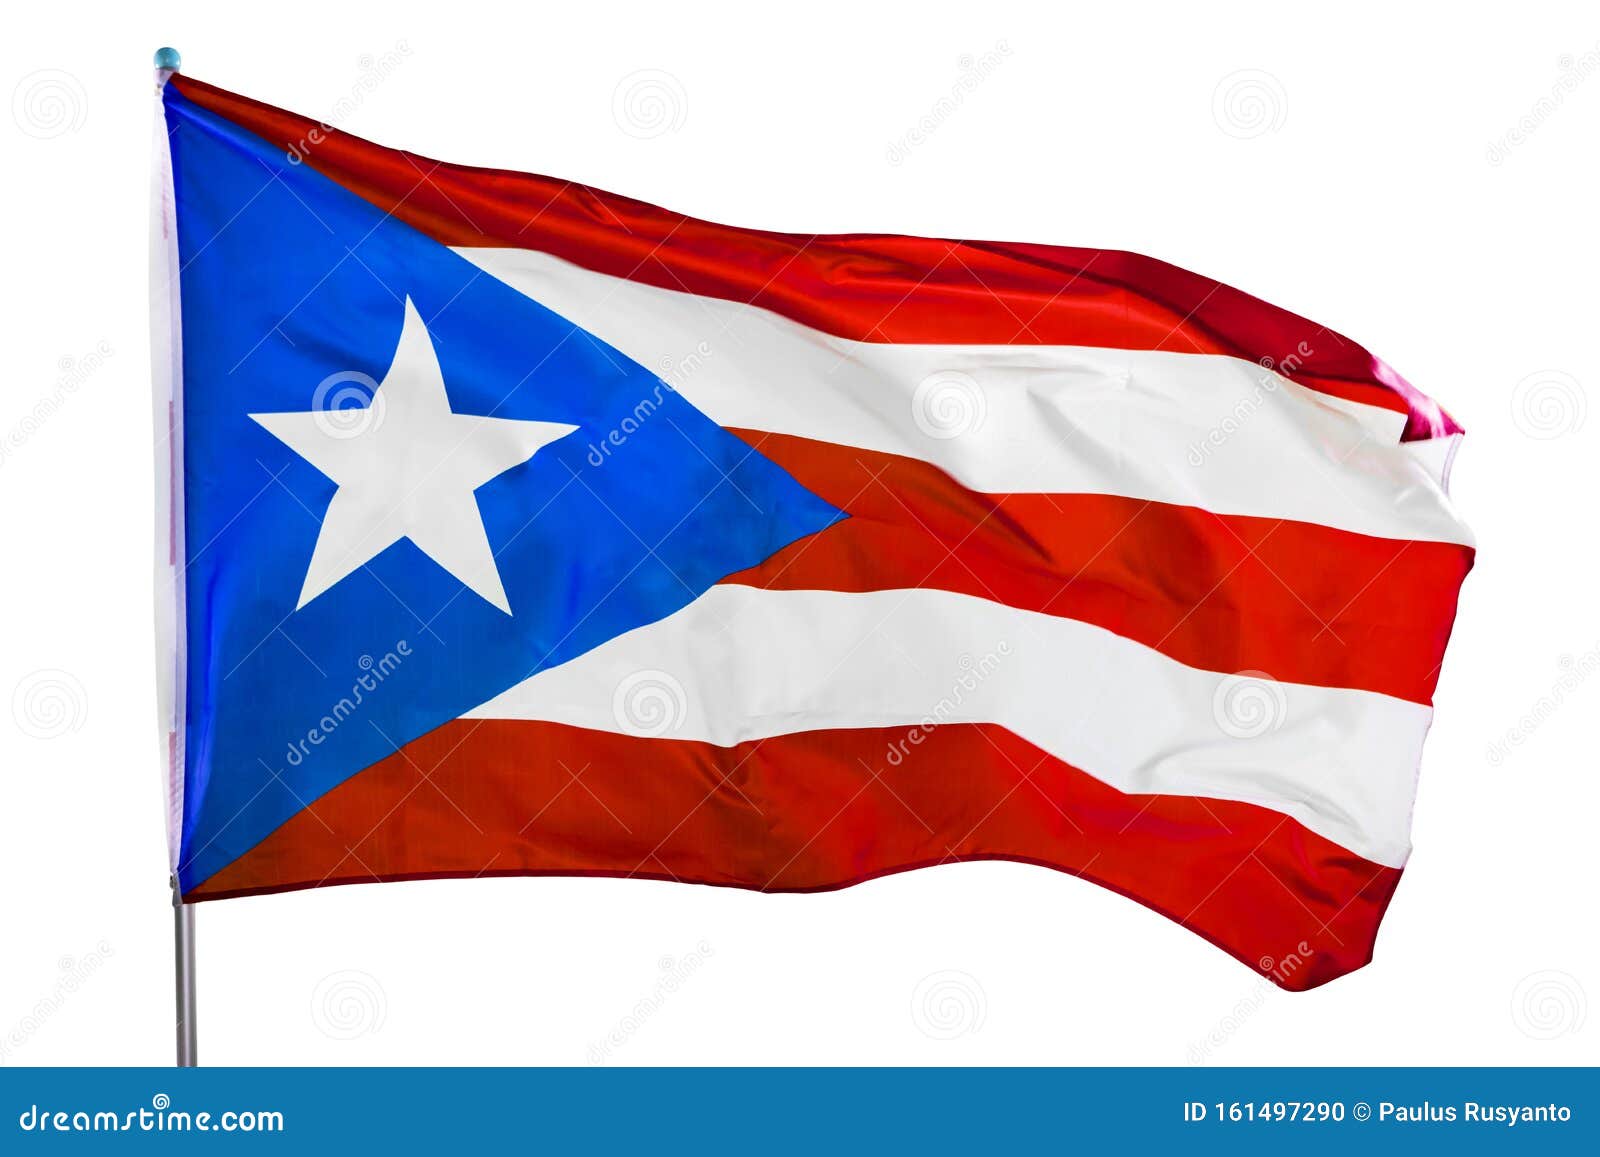 1 642 Puerto Rico Flag Photos Free Royalty Free Stock Photos From Dreamstime